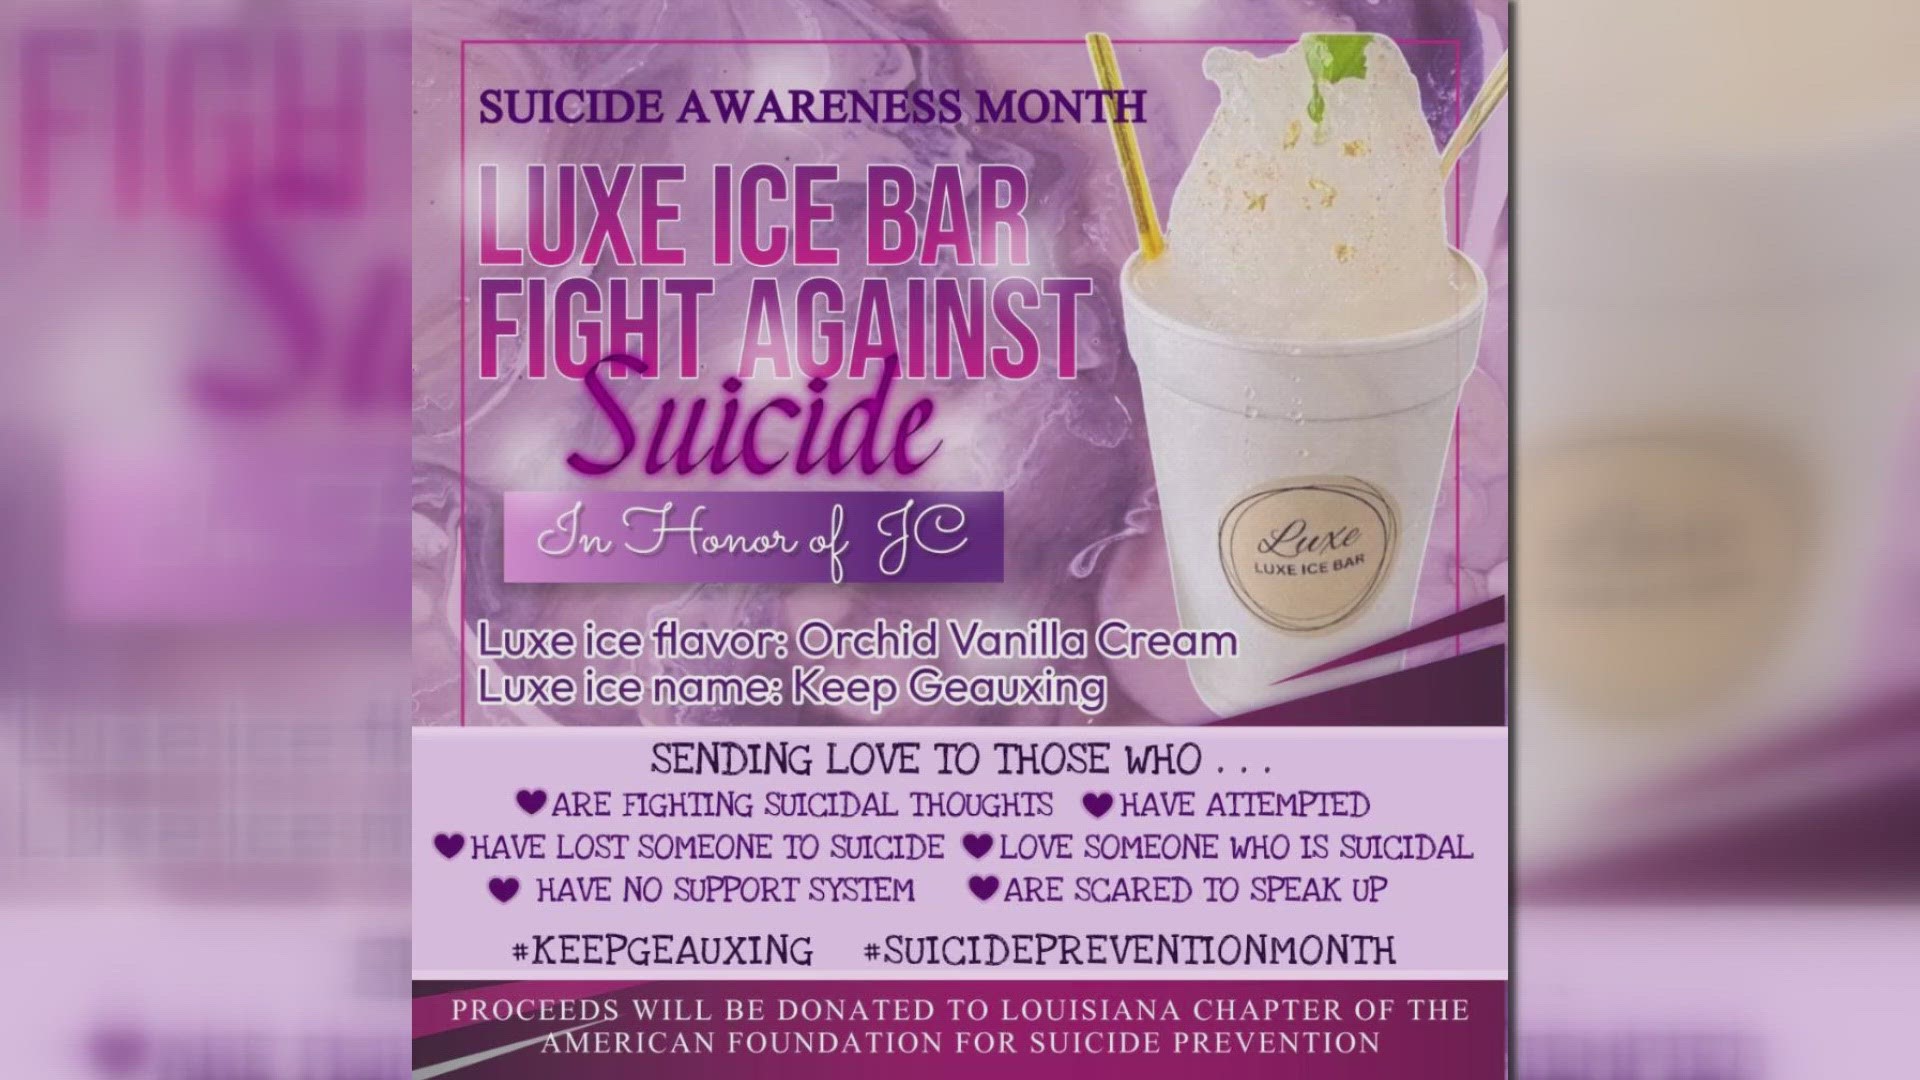 Luxe Ice Bar fight against suicide